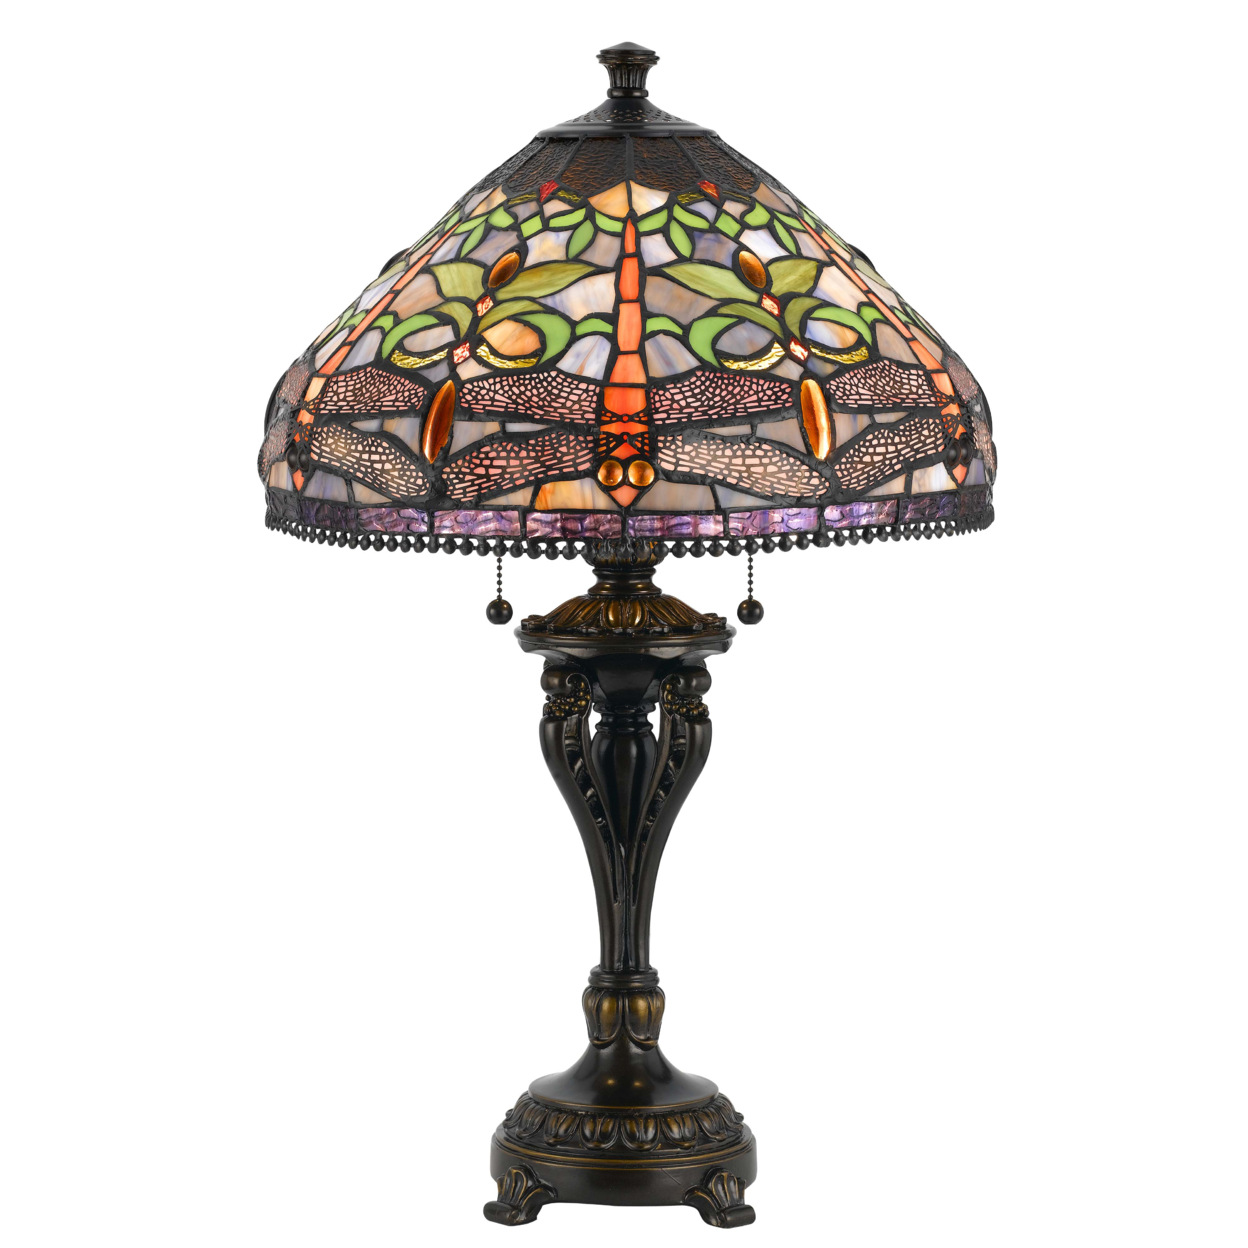 Tiffany Table Lamp With Metal Body And Dragonfly Design Shade, Multicolor- Saltoro Sherpi